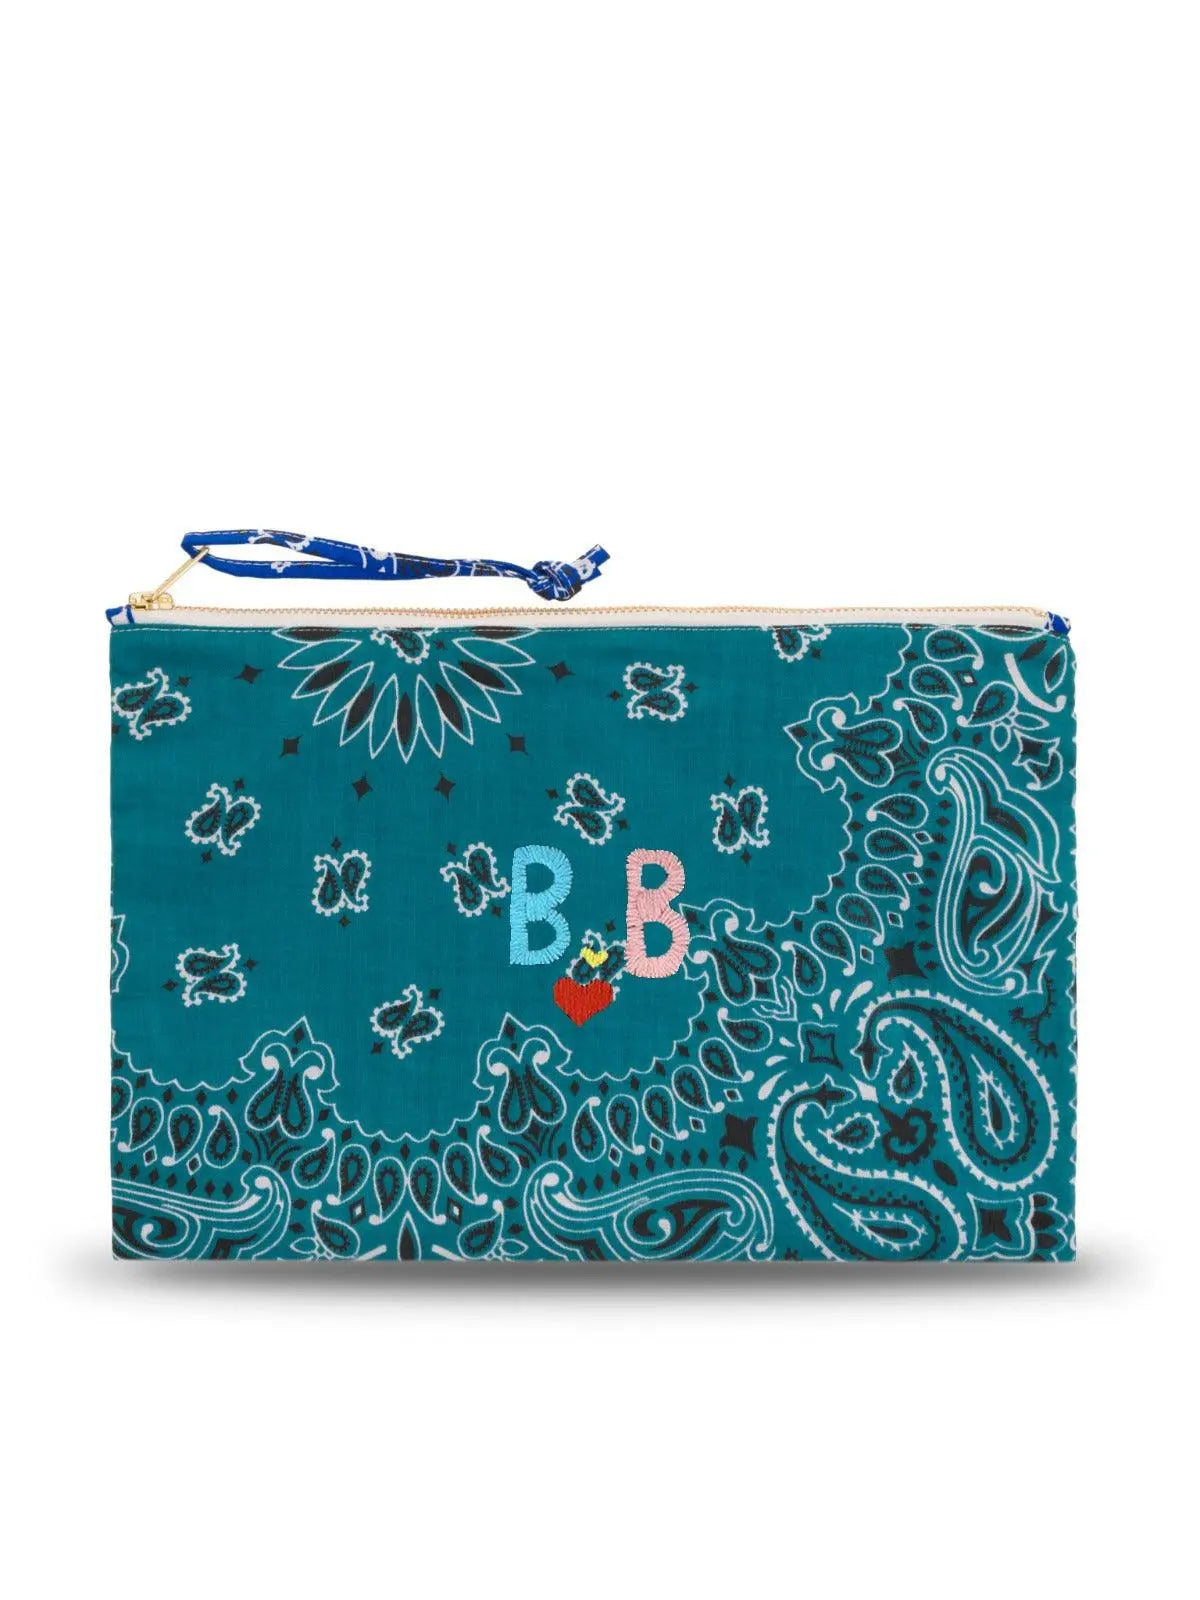 Pochette zippée - Petite broderie personnalisée - Call It By Your Name